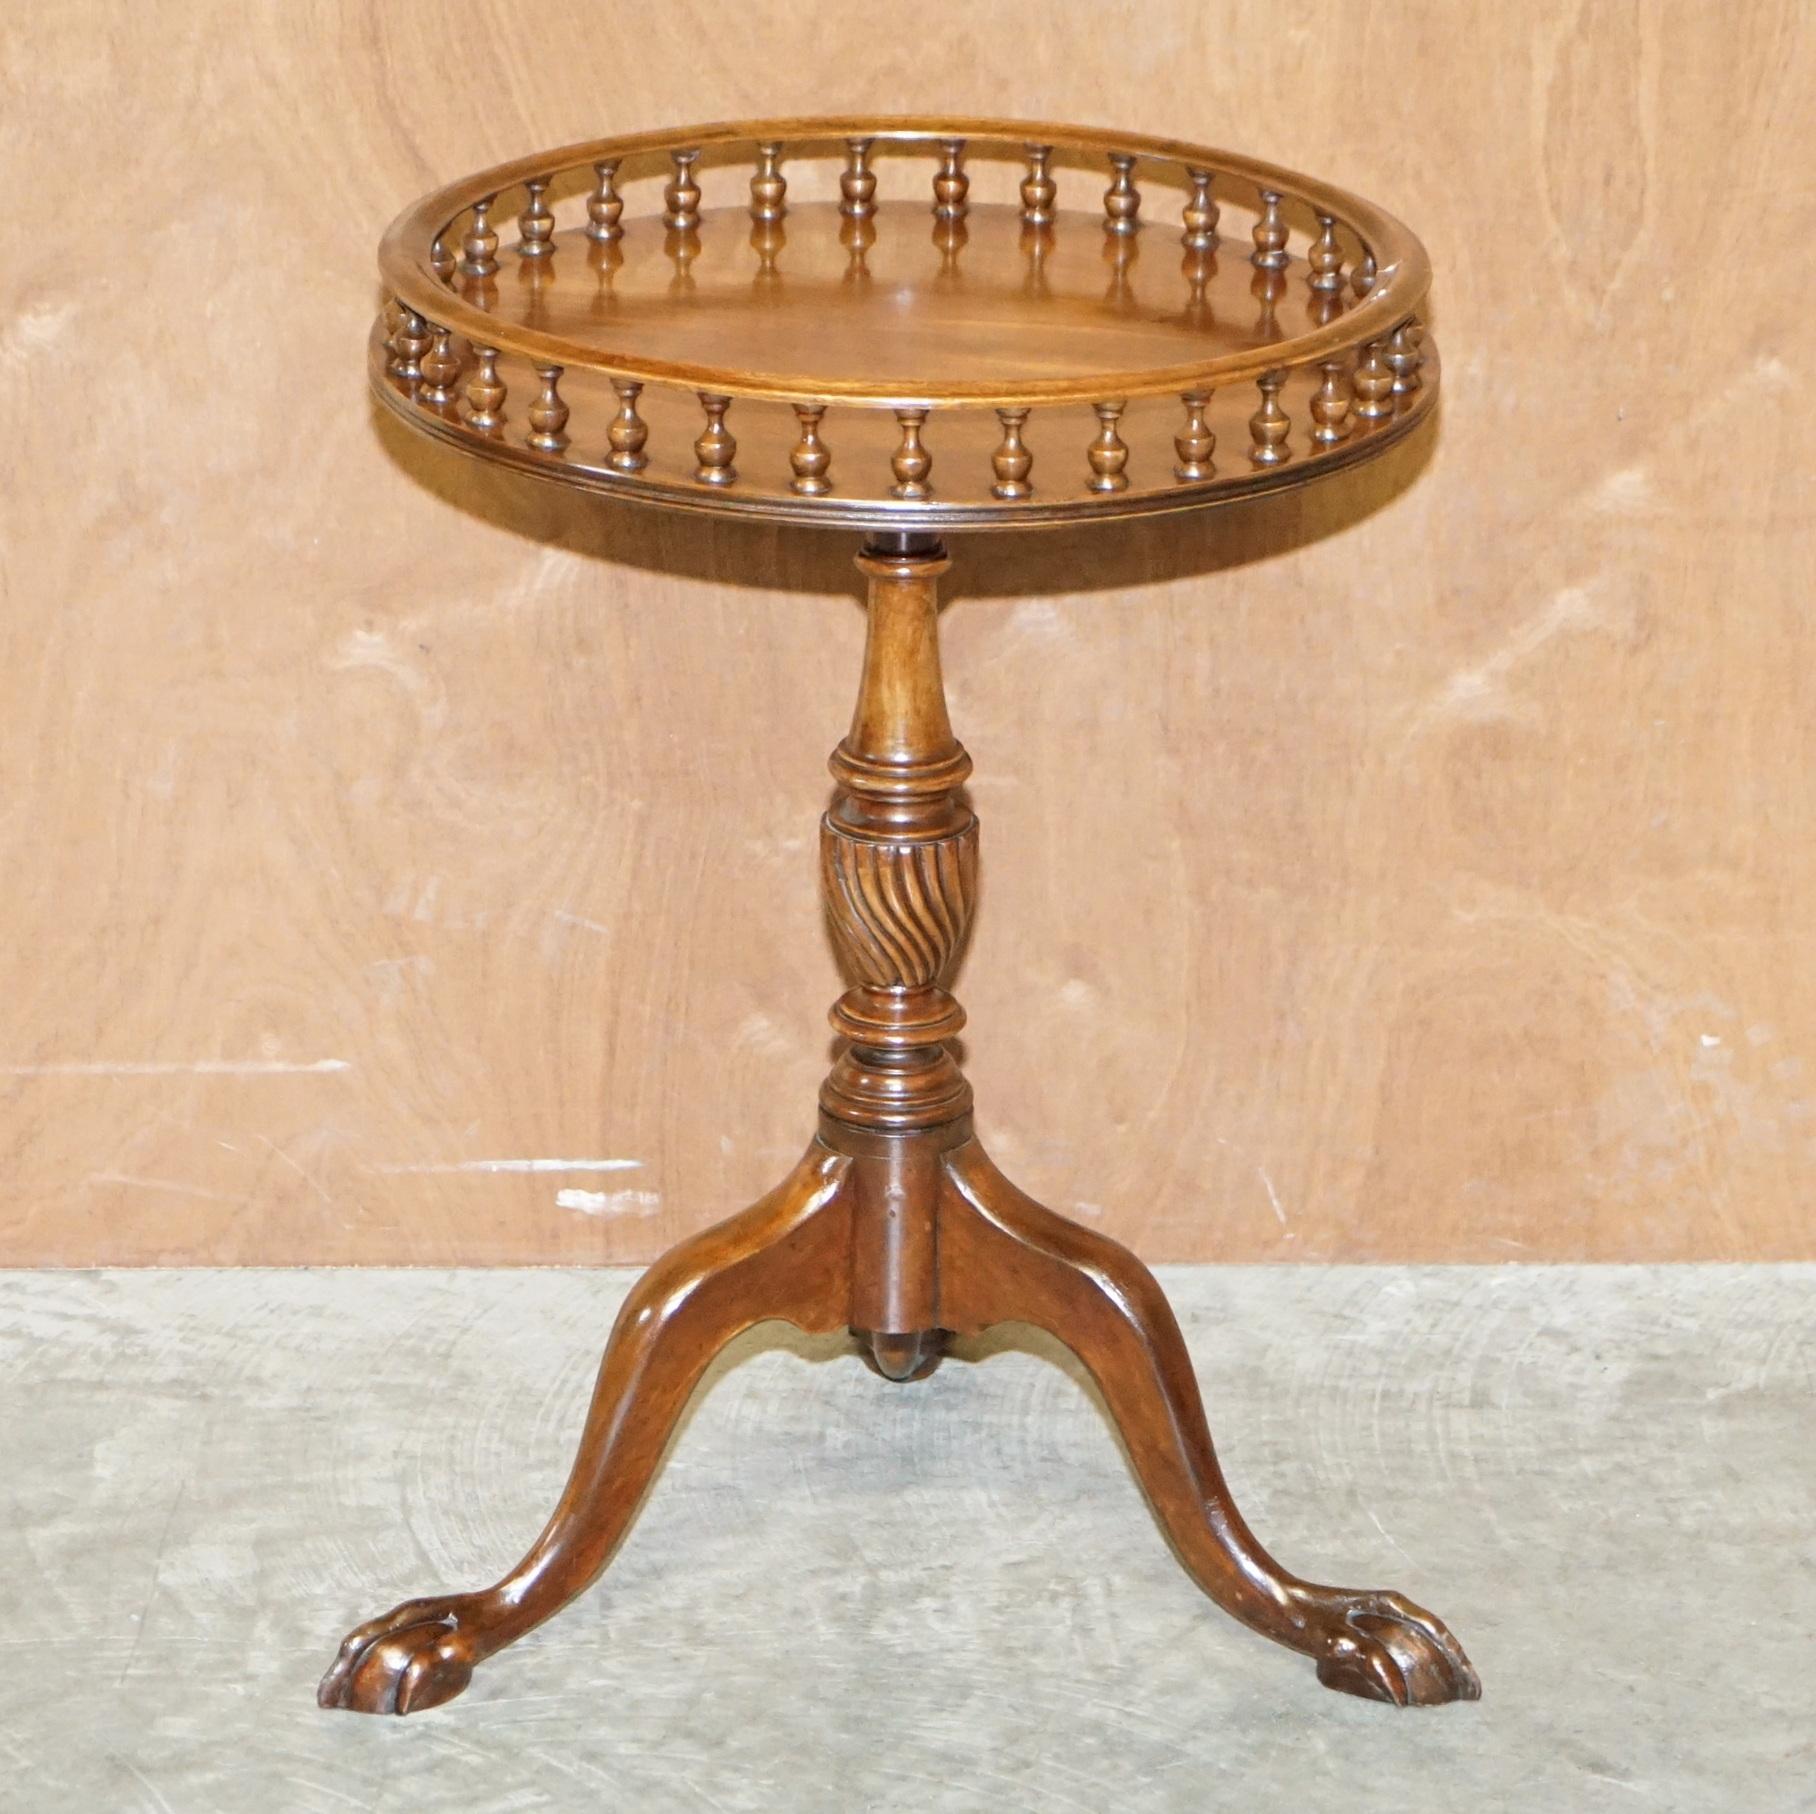 We are delighted to offer for sale this very well made and decorative Bevan Funnell lamp table in flamed mahogany with Regency style gallery rail 

A good looking and well made piece, I’ve not seen many with the gallery rail in wood, usually its